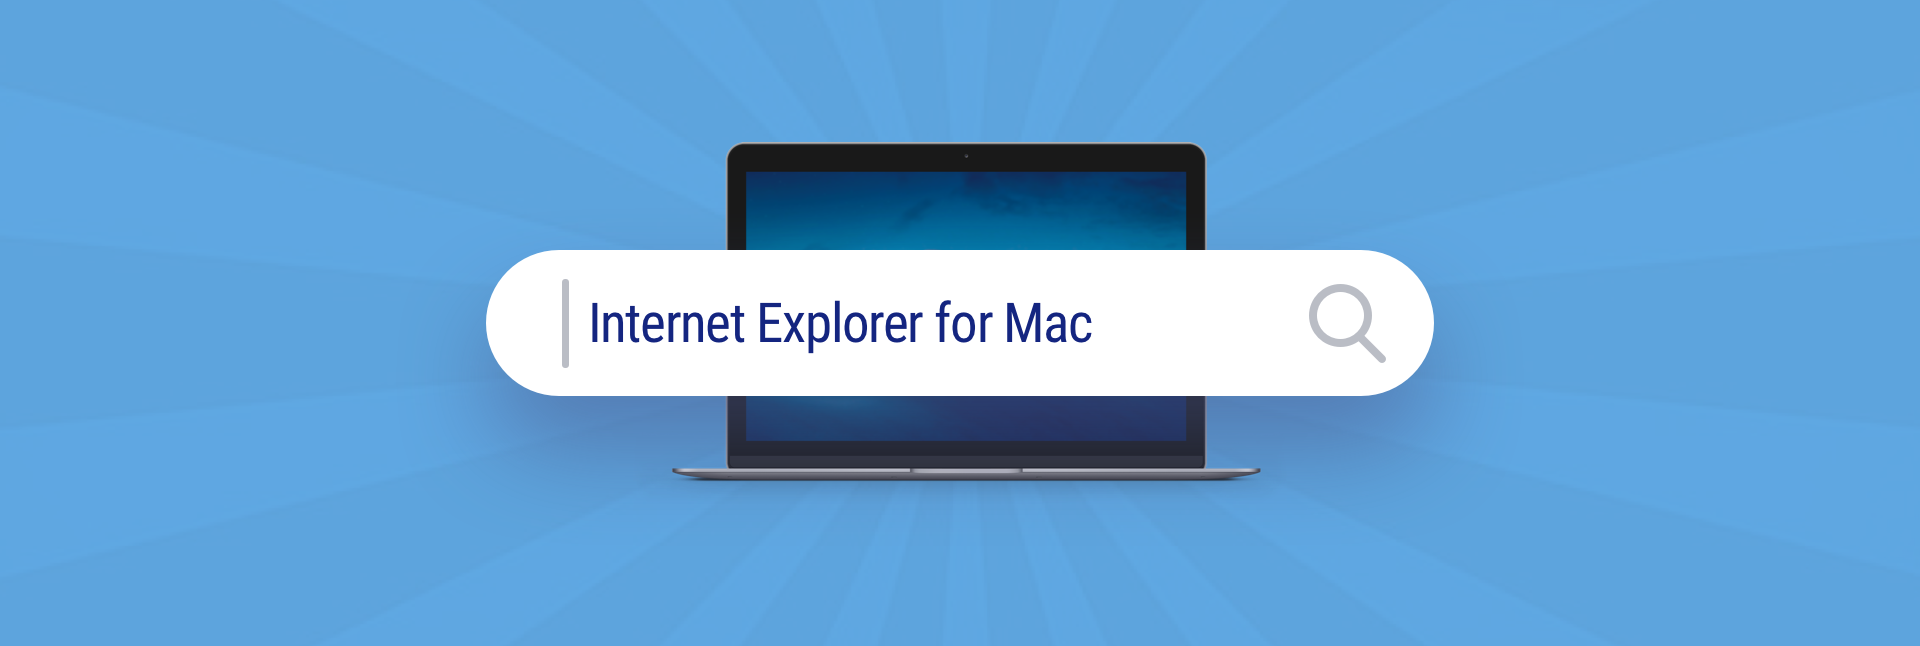 Do Macs Need Internet Security Software